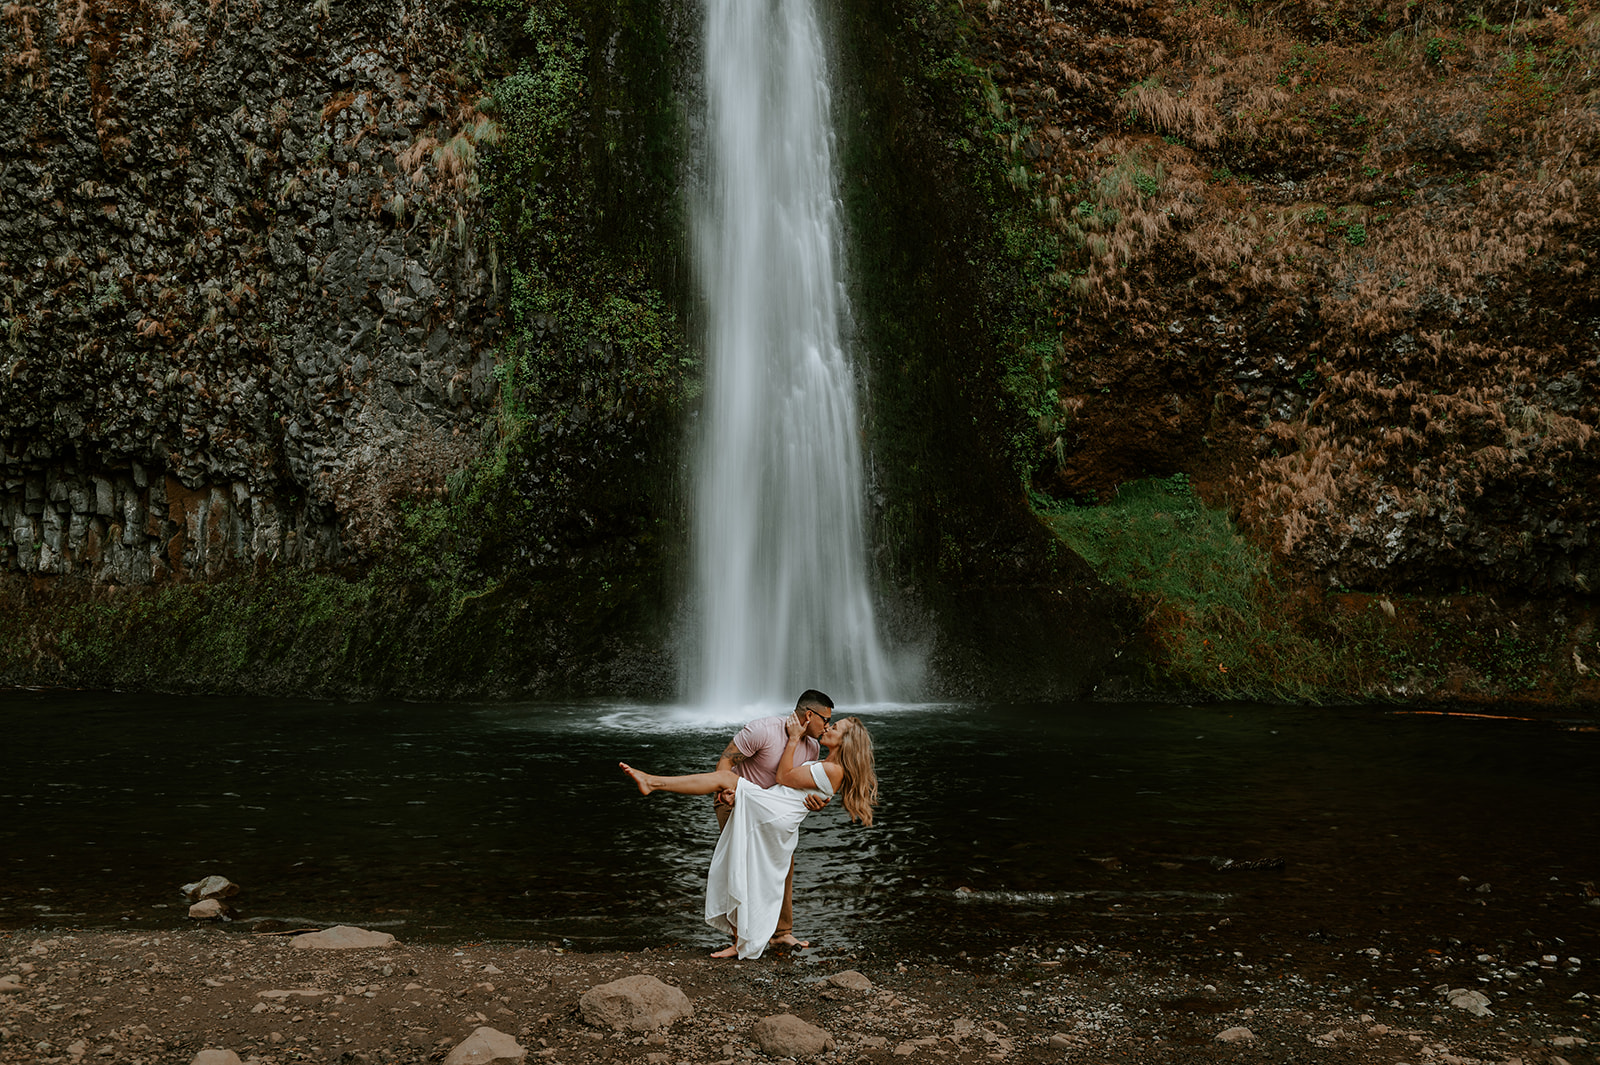 Couple kissing at the base of horsetail falls in the Colombia river gorge. Guy dipping the girl